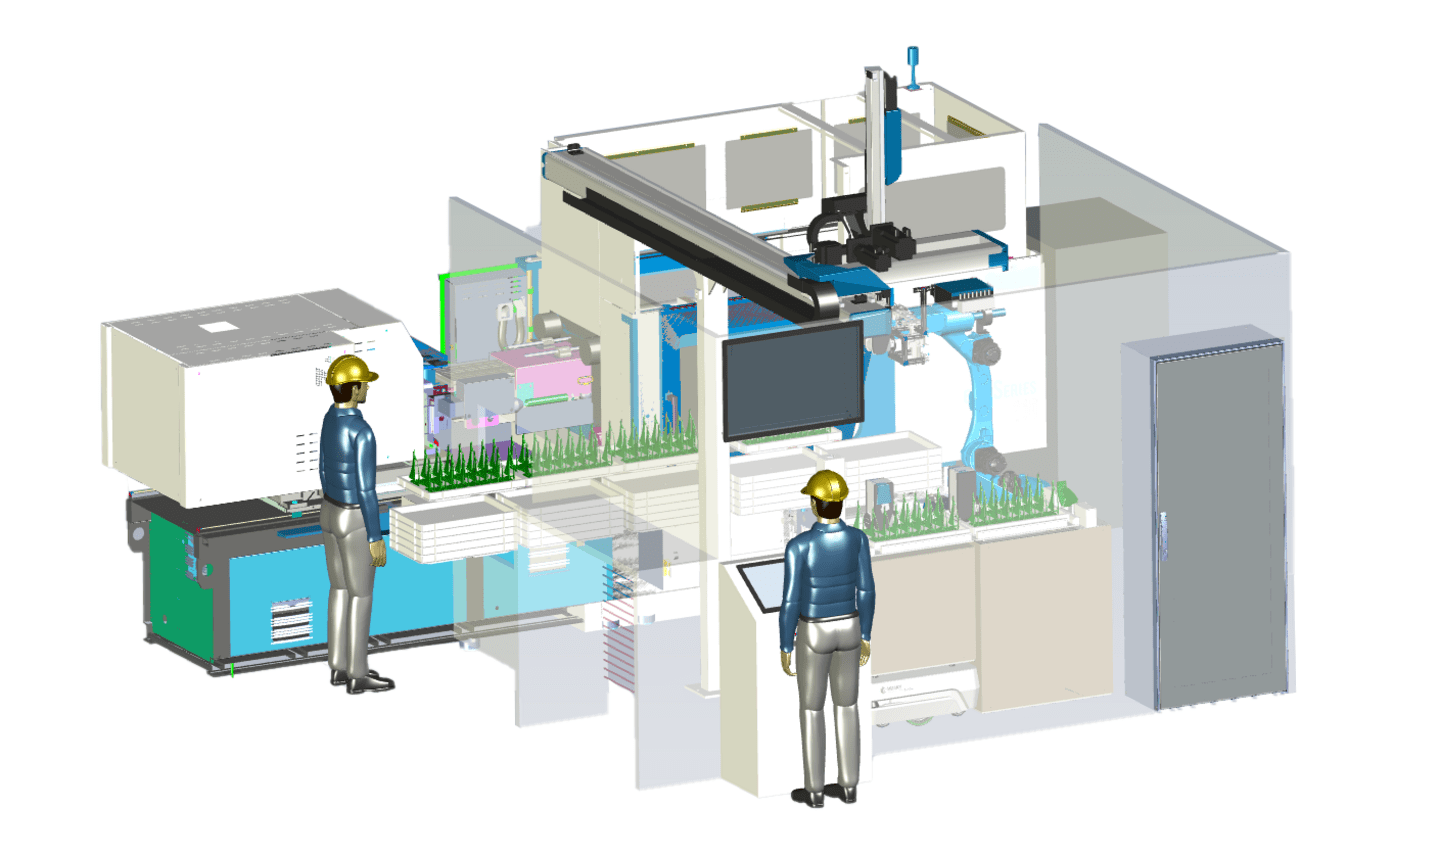 Smart Automation Systems - cell in 3D